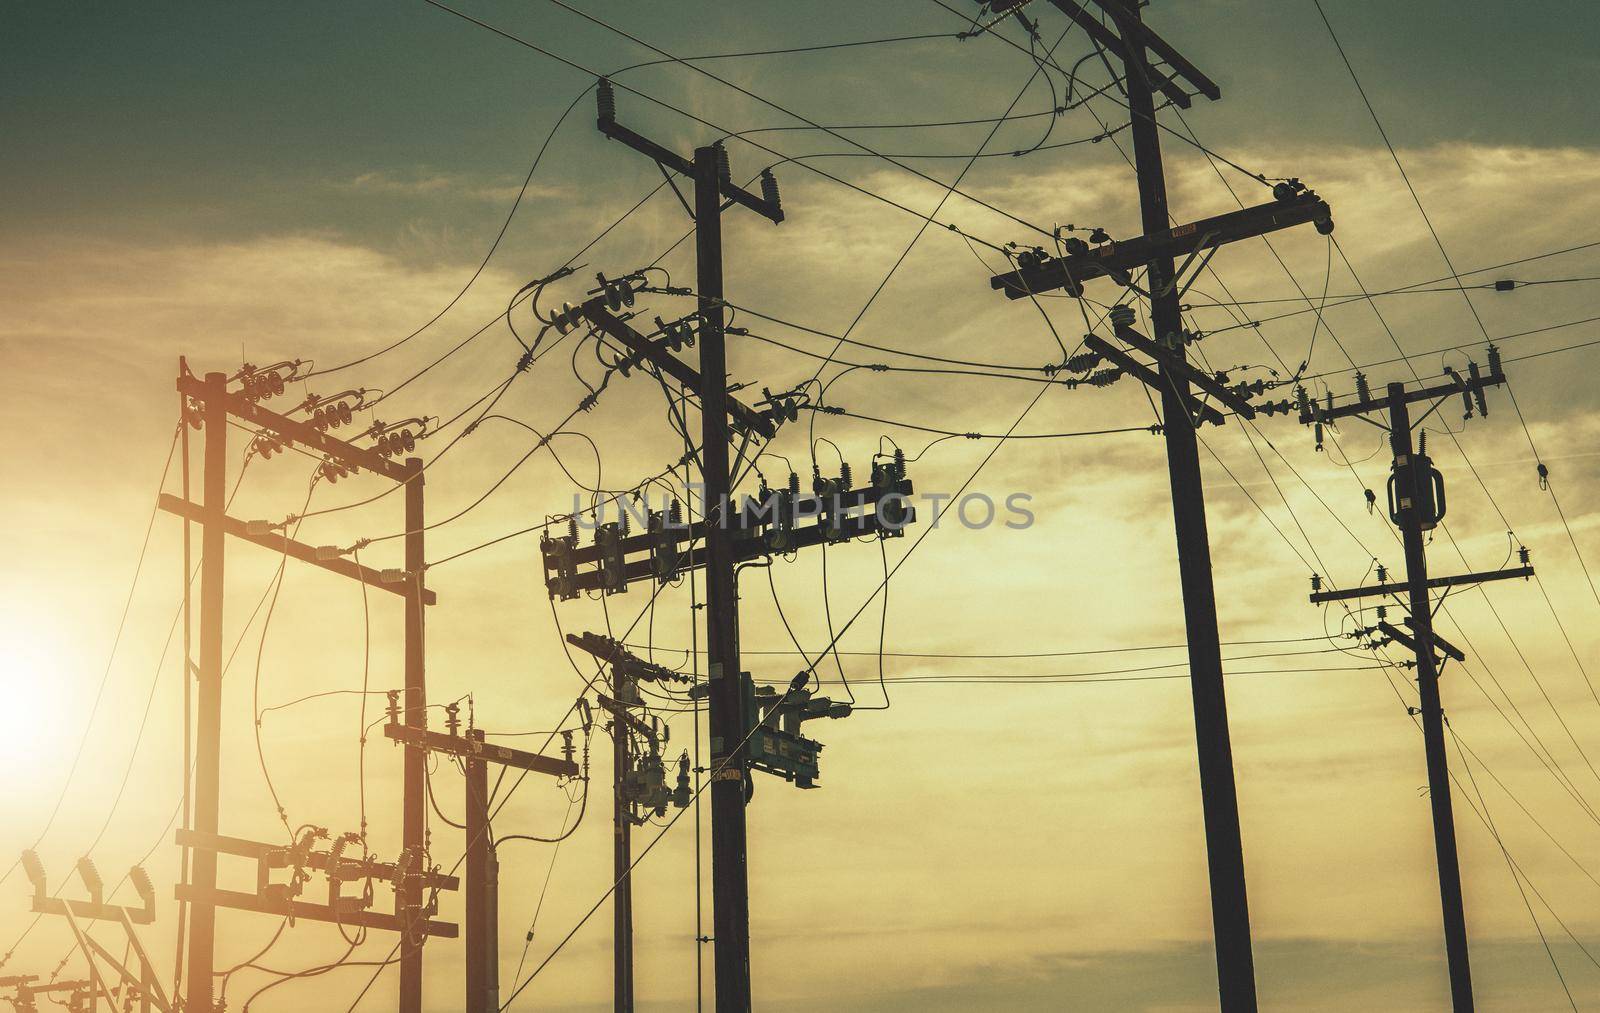 Aged Wooden Electric Poles and High Voltage Infrastructure. Power Industry Theme.